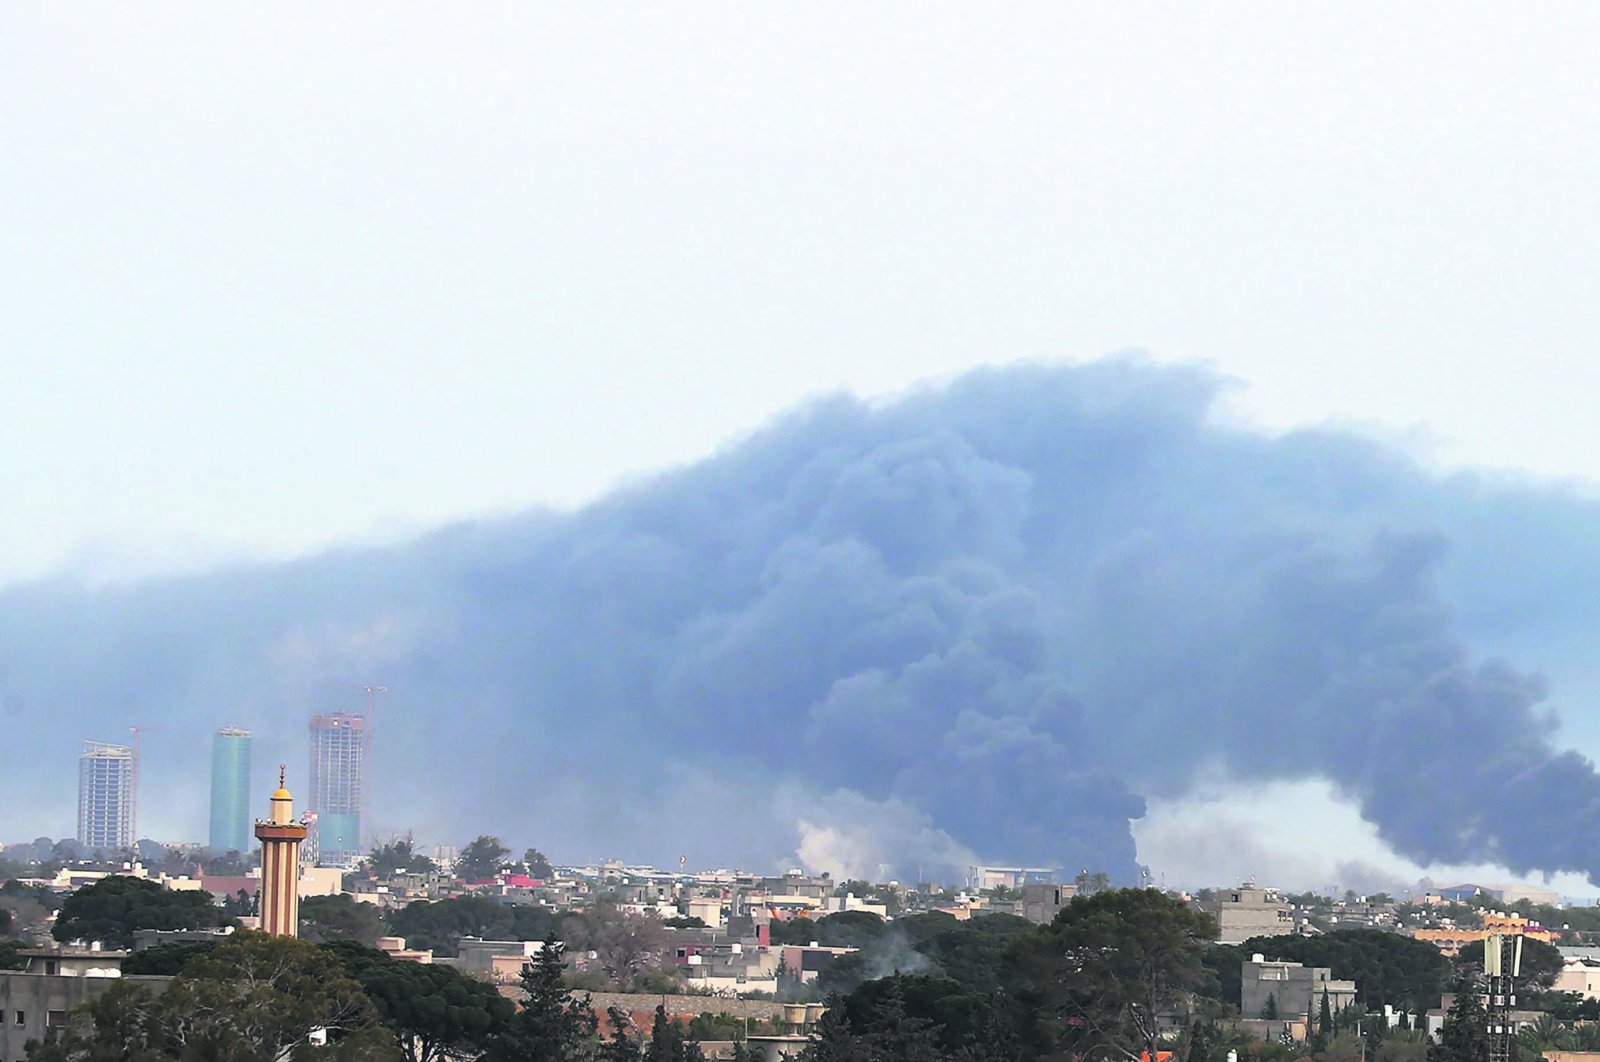 Smoke fumes rise above buildings in the Libyan capital Tripoli, during reported shelling by renegade commander Haftar's forces, on May 9, 2020 (AFP Photo)